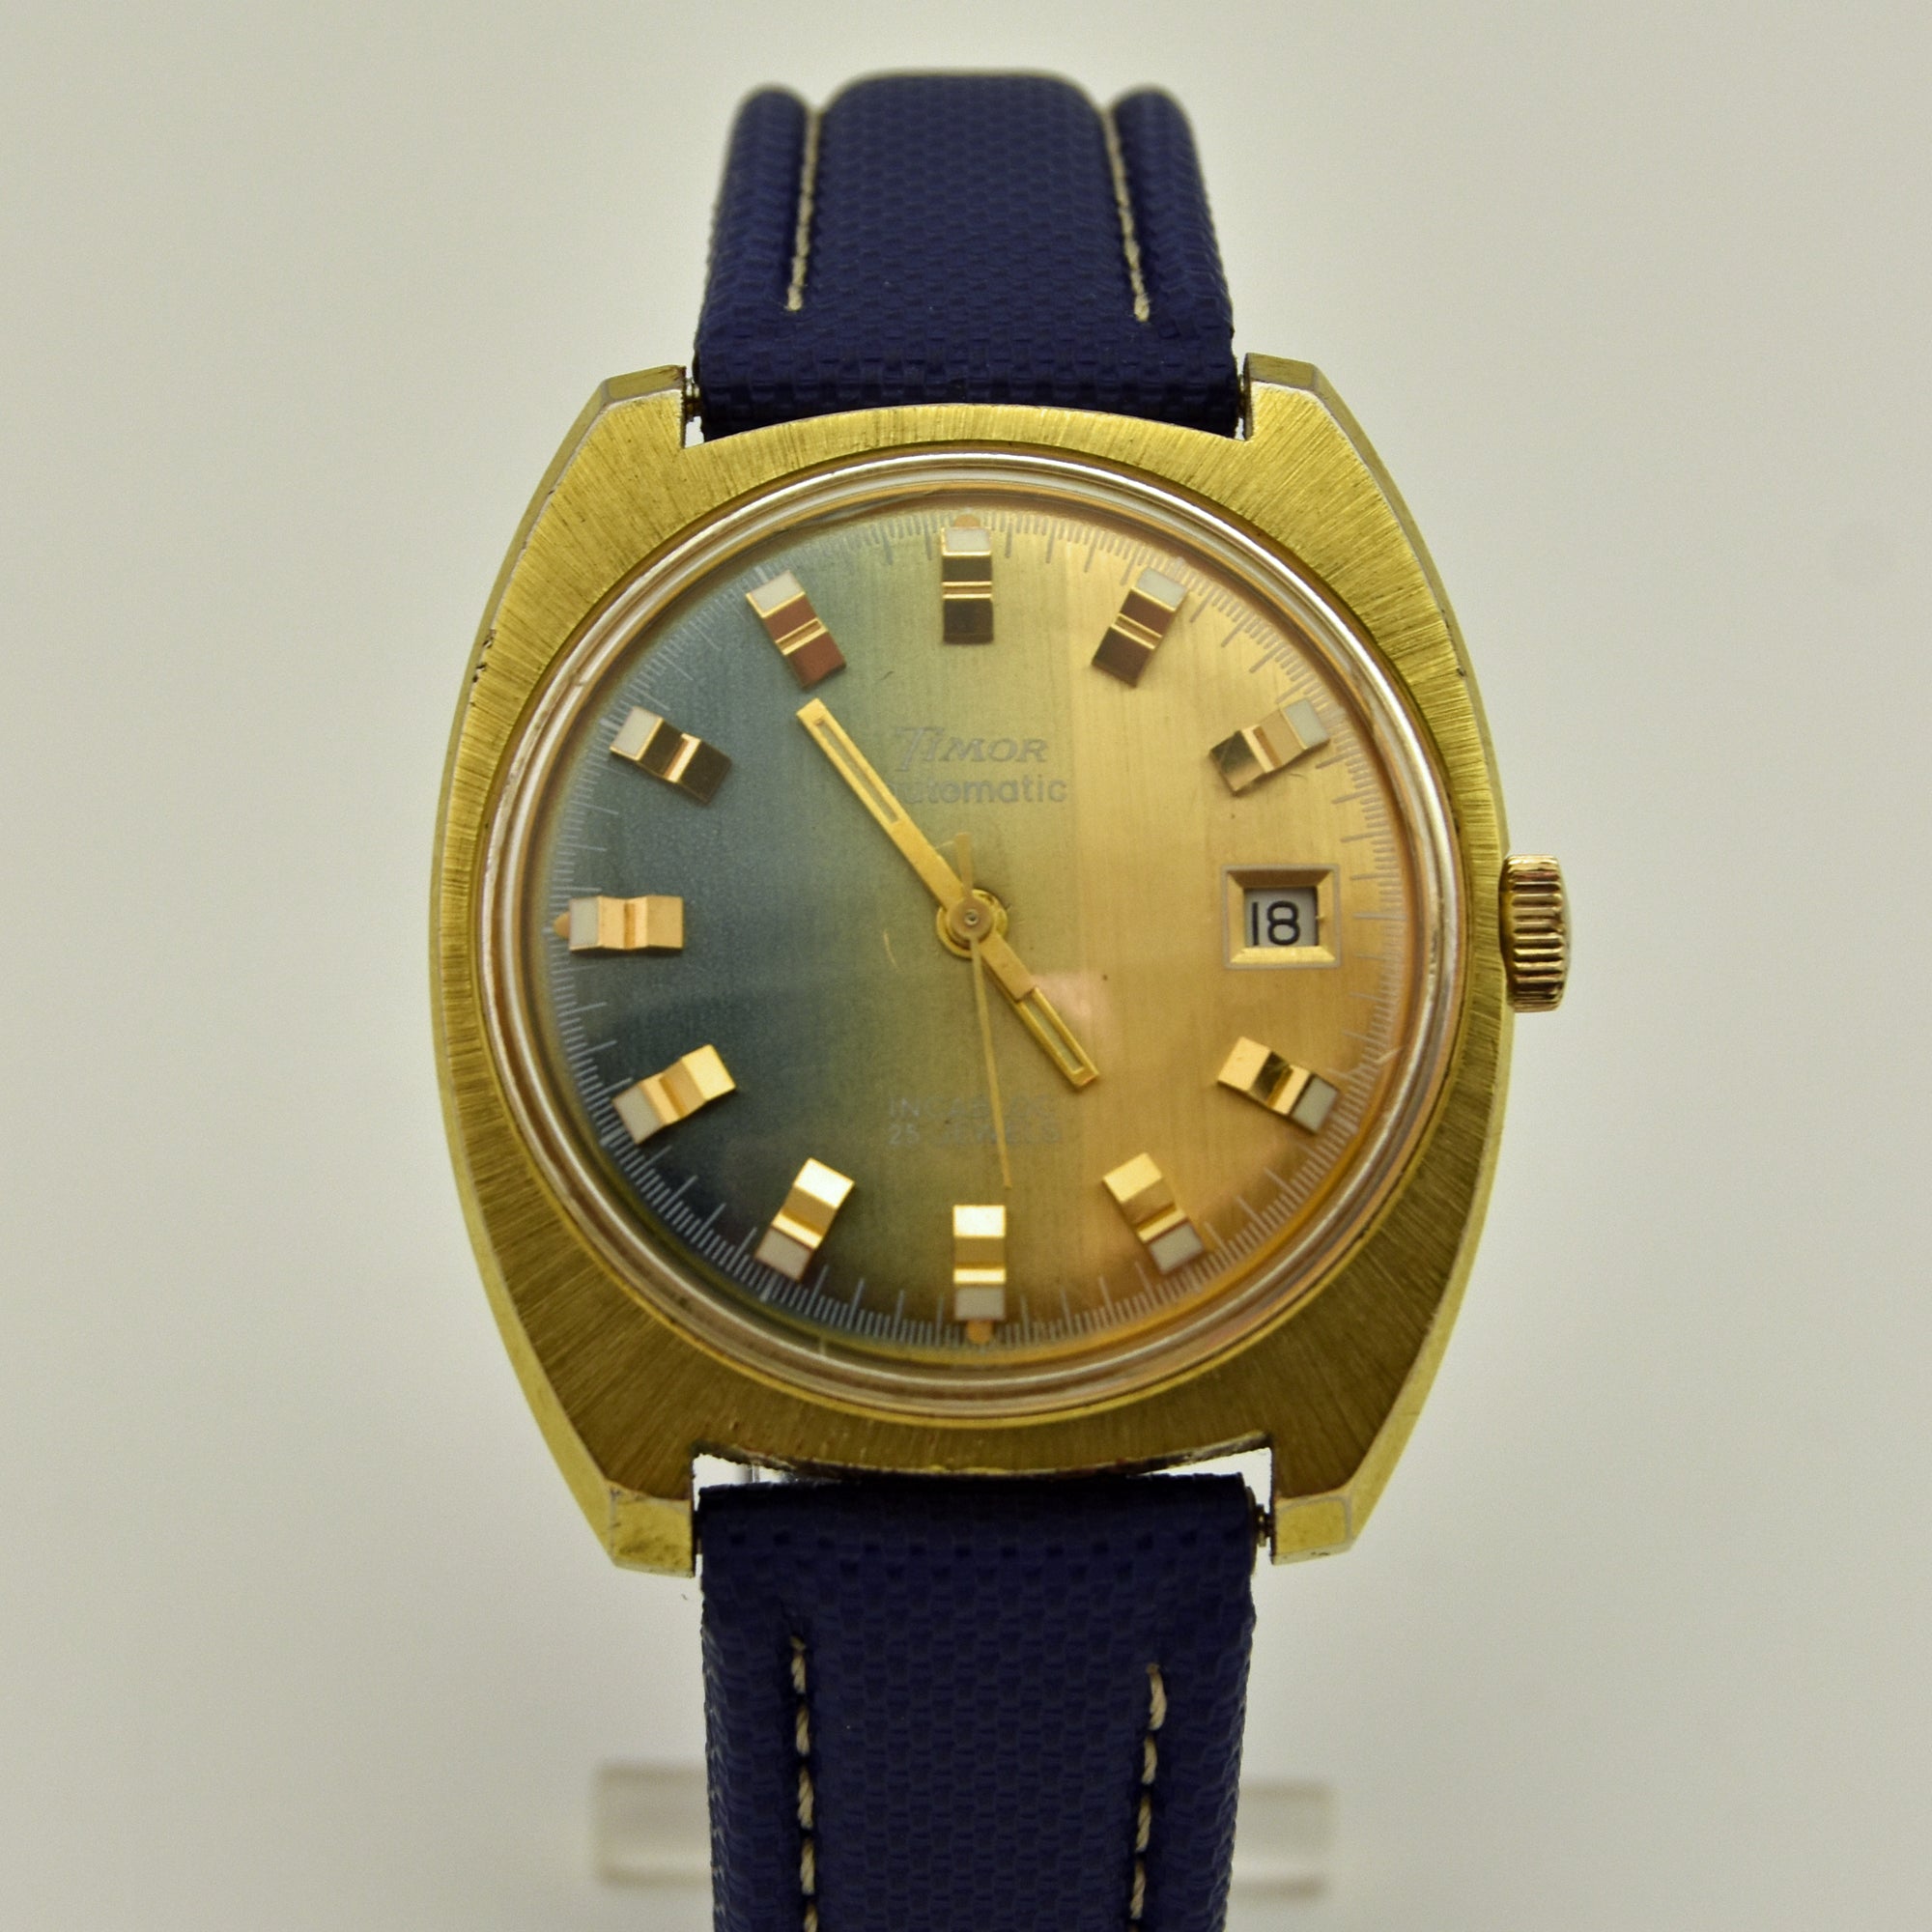 Timor Automatic 1970s wrist watch with date